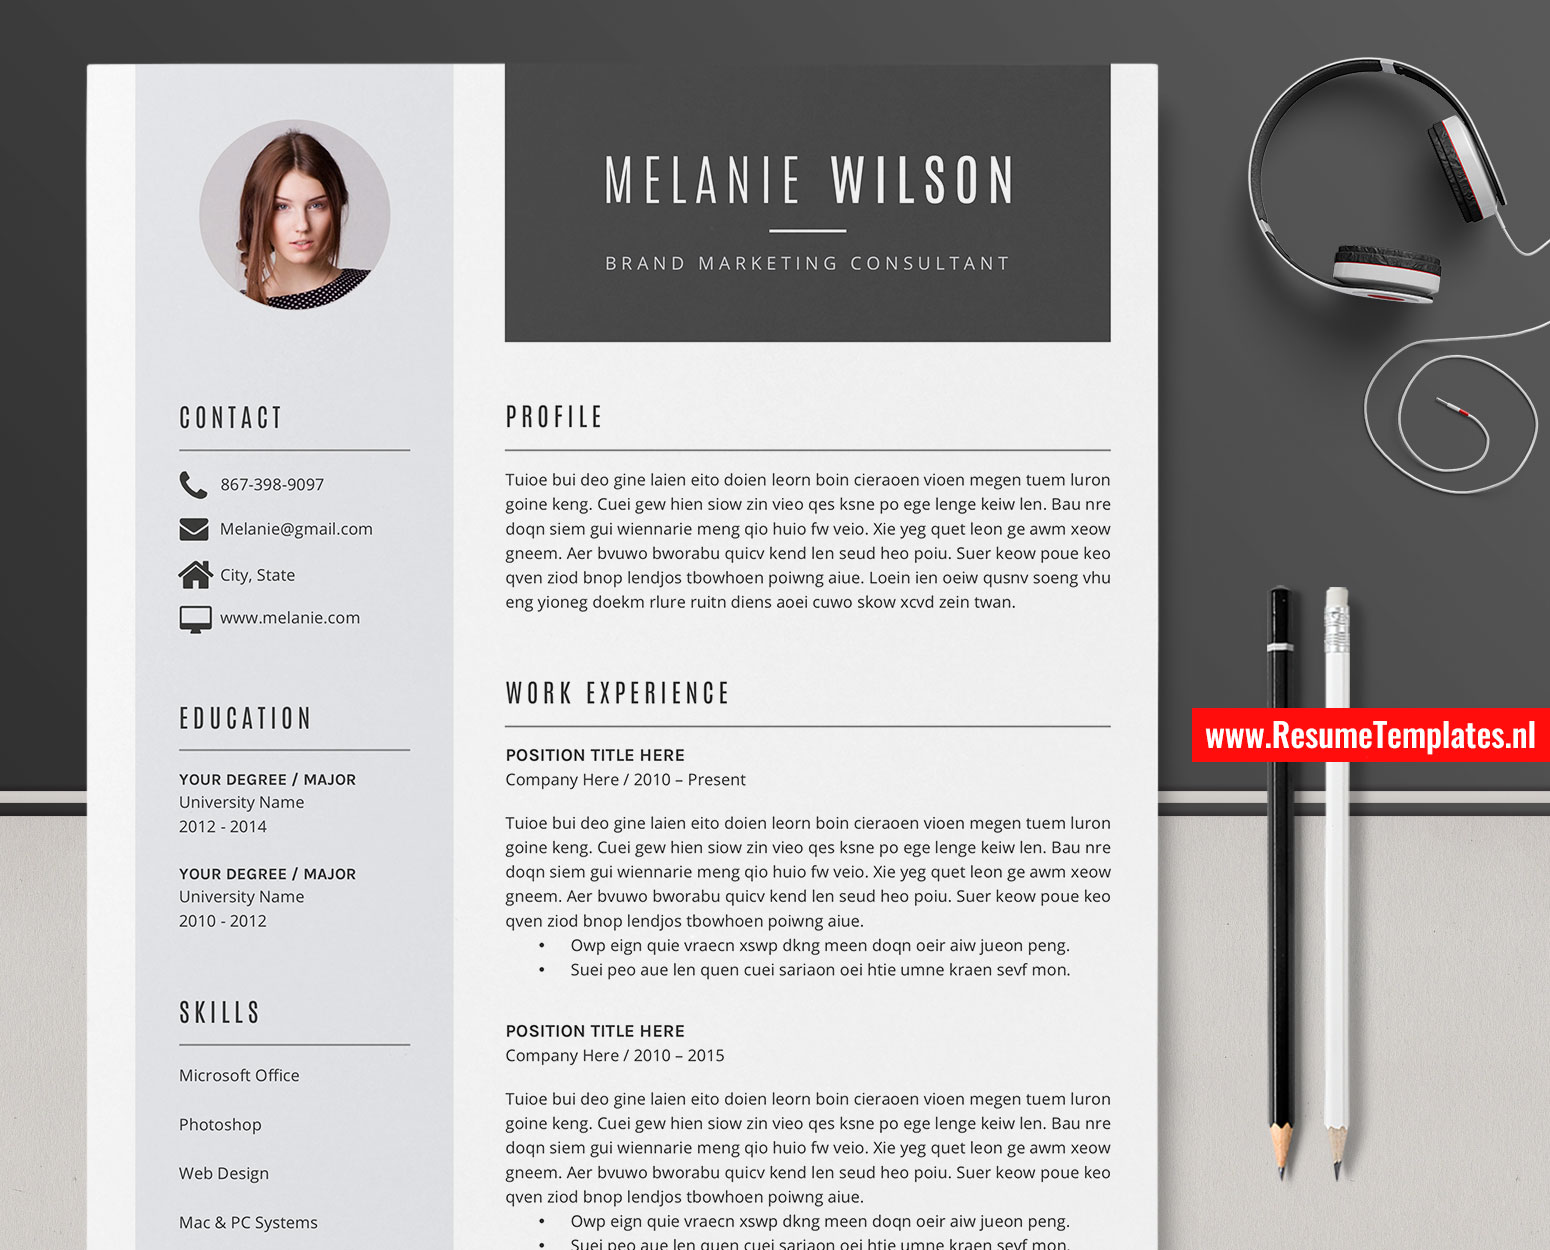 Ms Word Resume Template from www.resumetemplates.nl